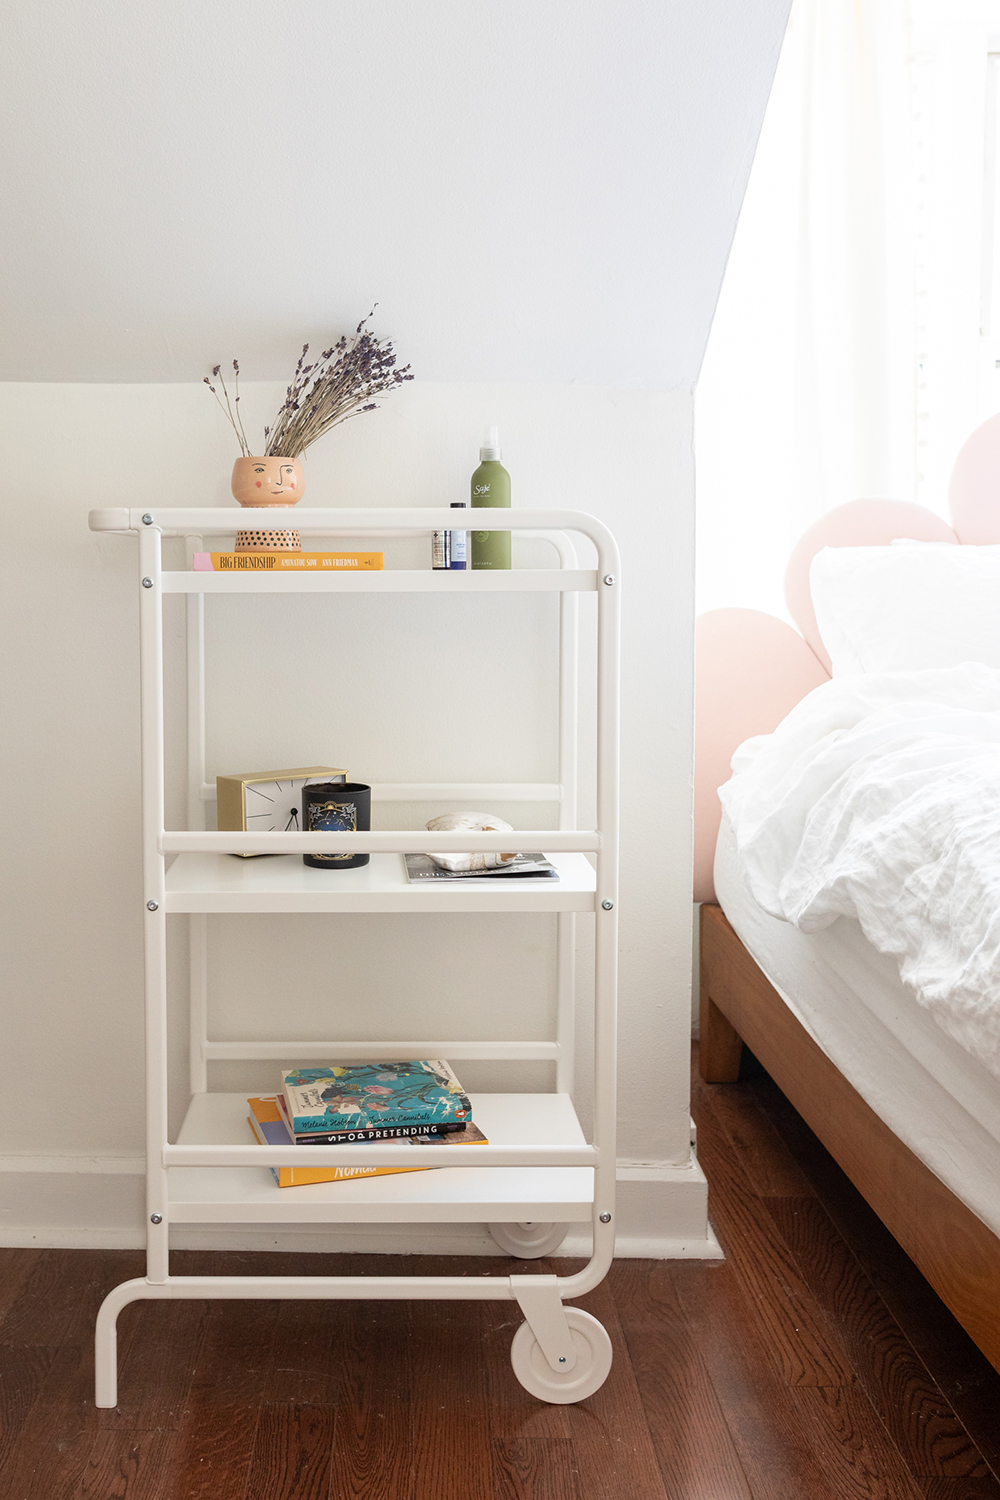 Bedroom nightstand with books, clock and lavender sitting on top